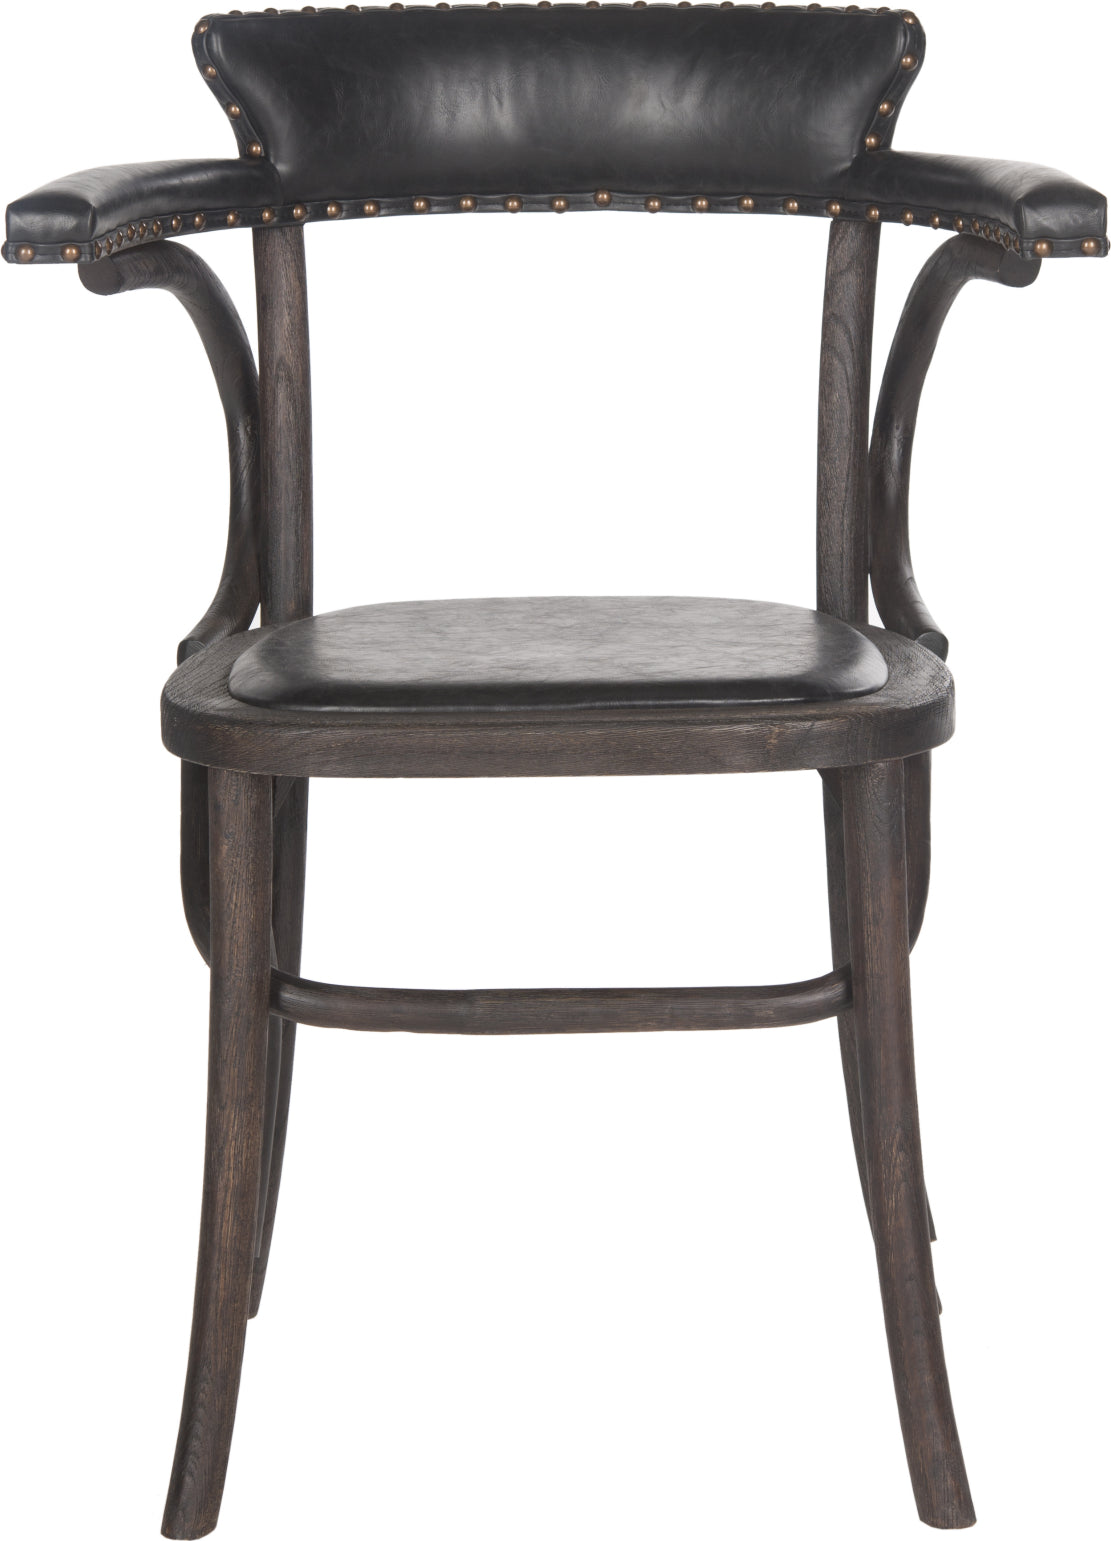 Safavieh Kenny 19''H Arm Chair-Brass Nail Heads Antique Black and Dark Umber Furniture main image